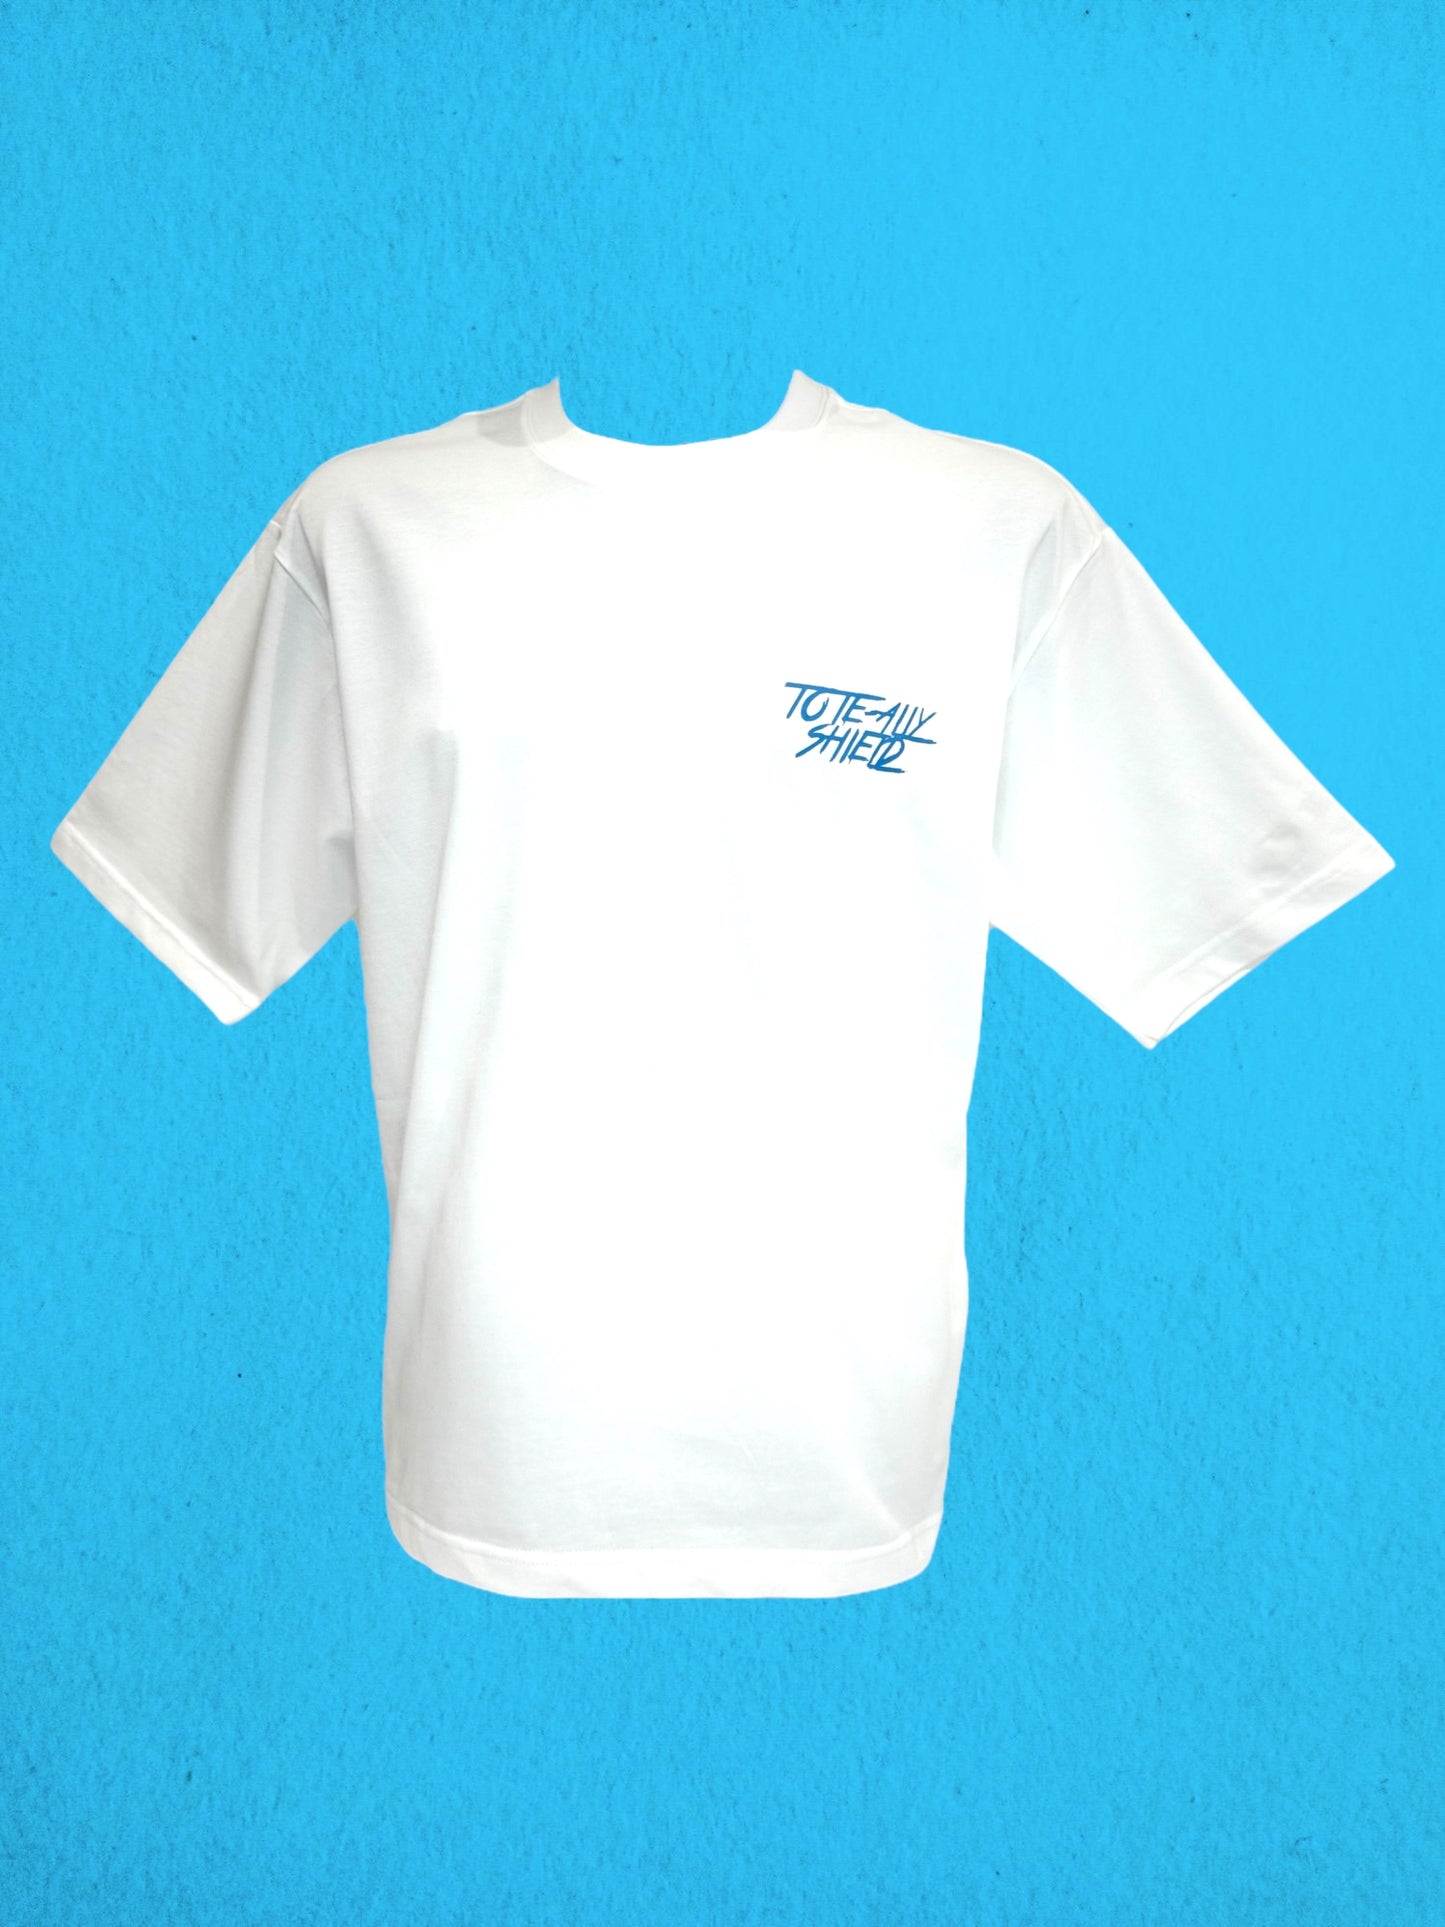 Front view of white short-sleeved, boxy-fit, heavyweight T-shirt. The design is plain with the ‘TOTE-ALLY SHIELD’ logo on the left chest in baby blue text.